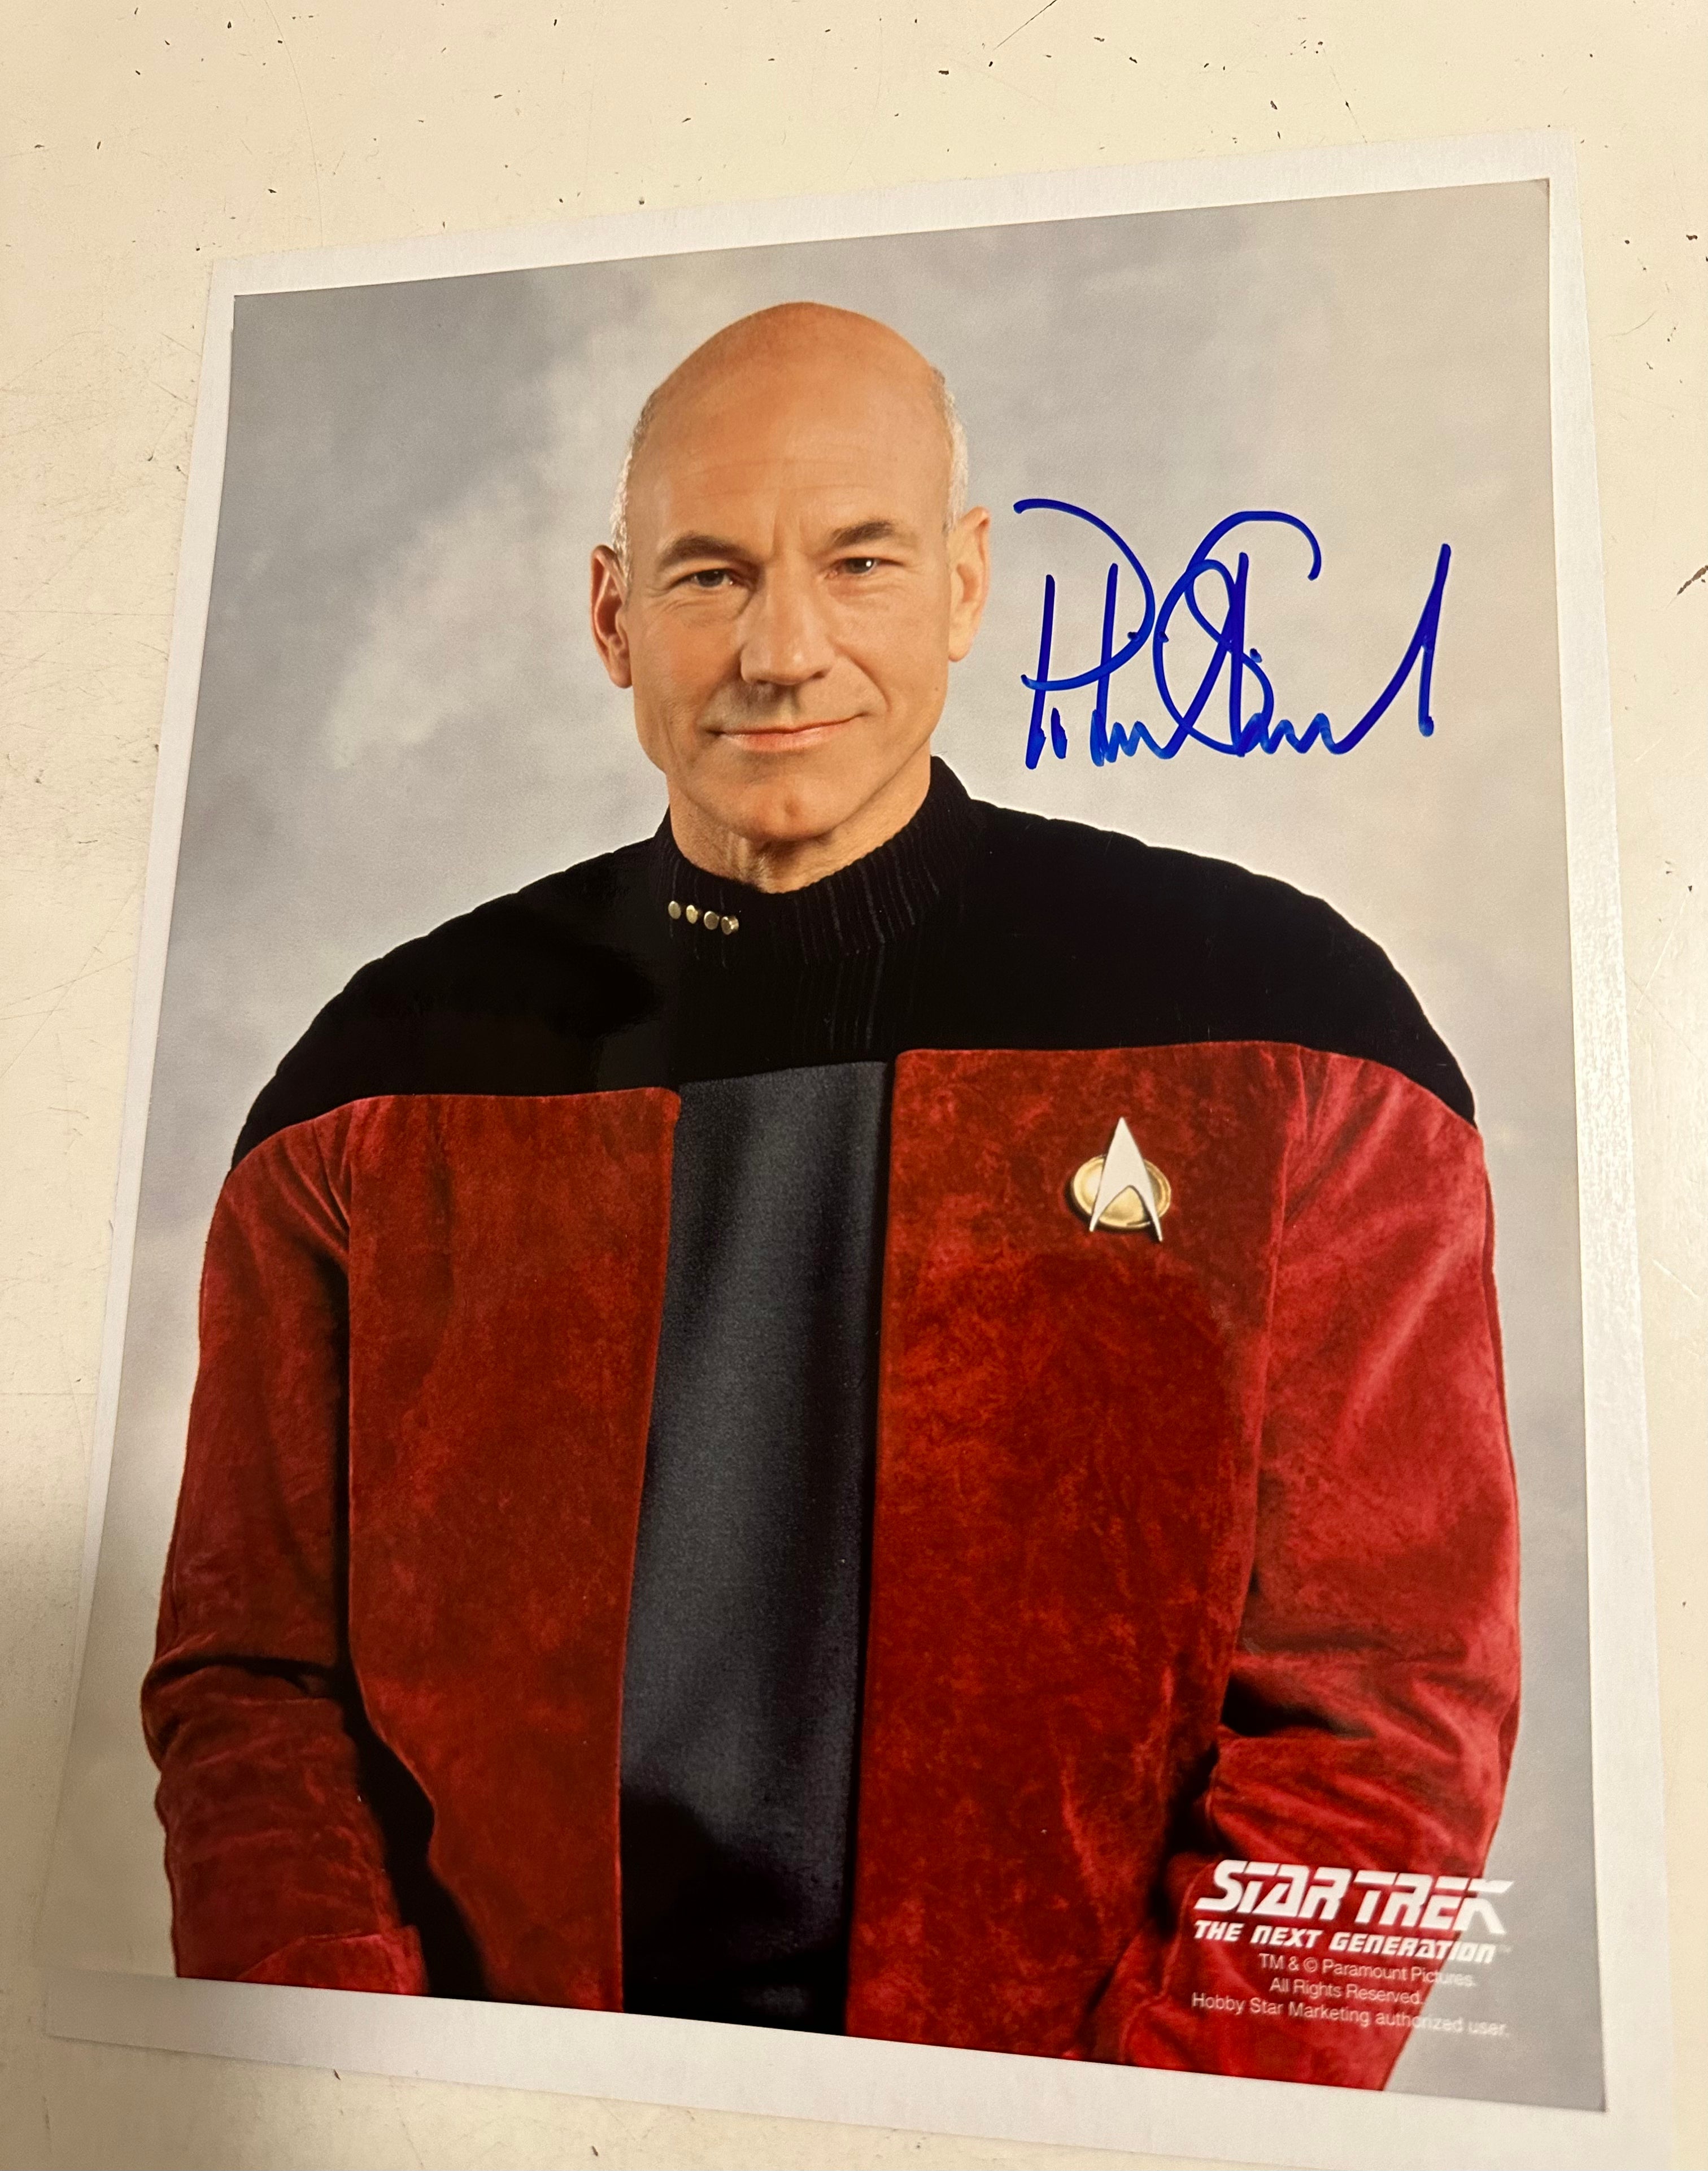 Star Trek Patrick Stewart rare autograph 8x10 photo certified by Fanexpo with COA